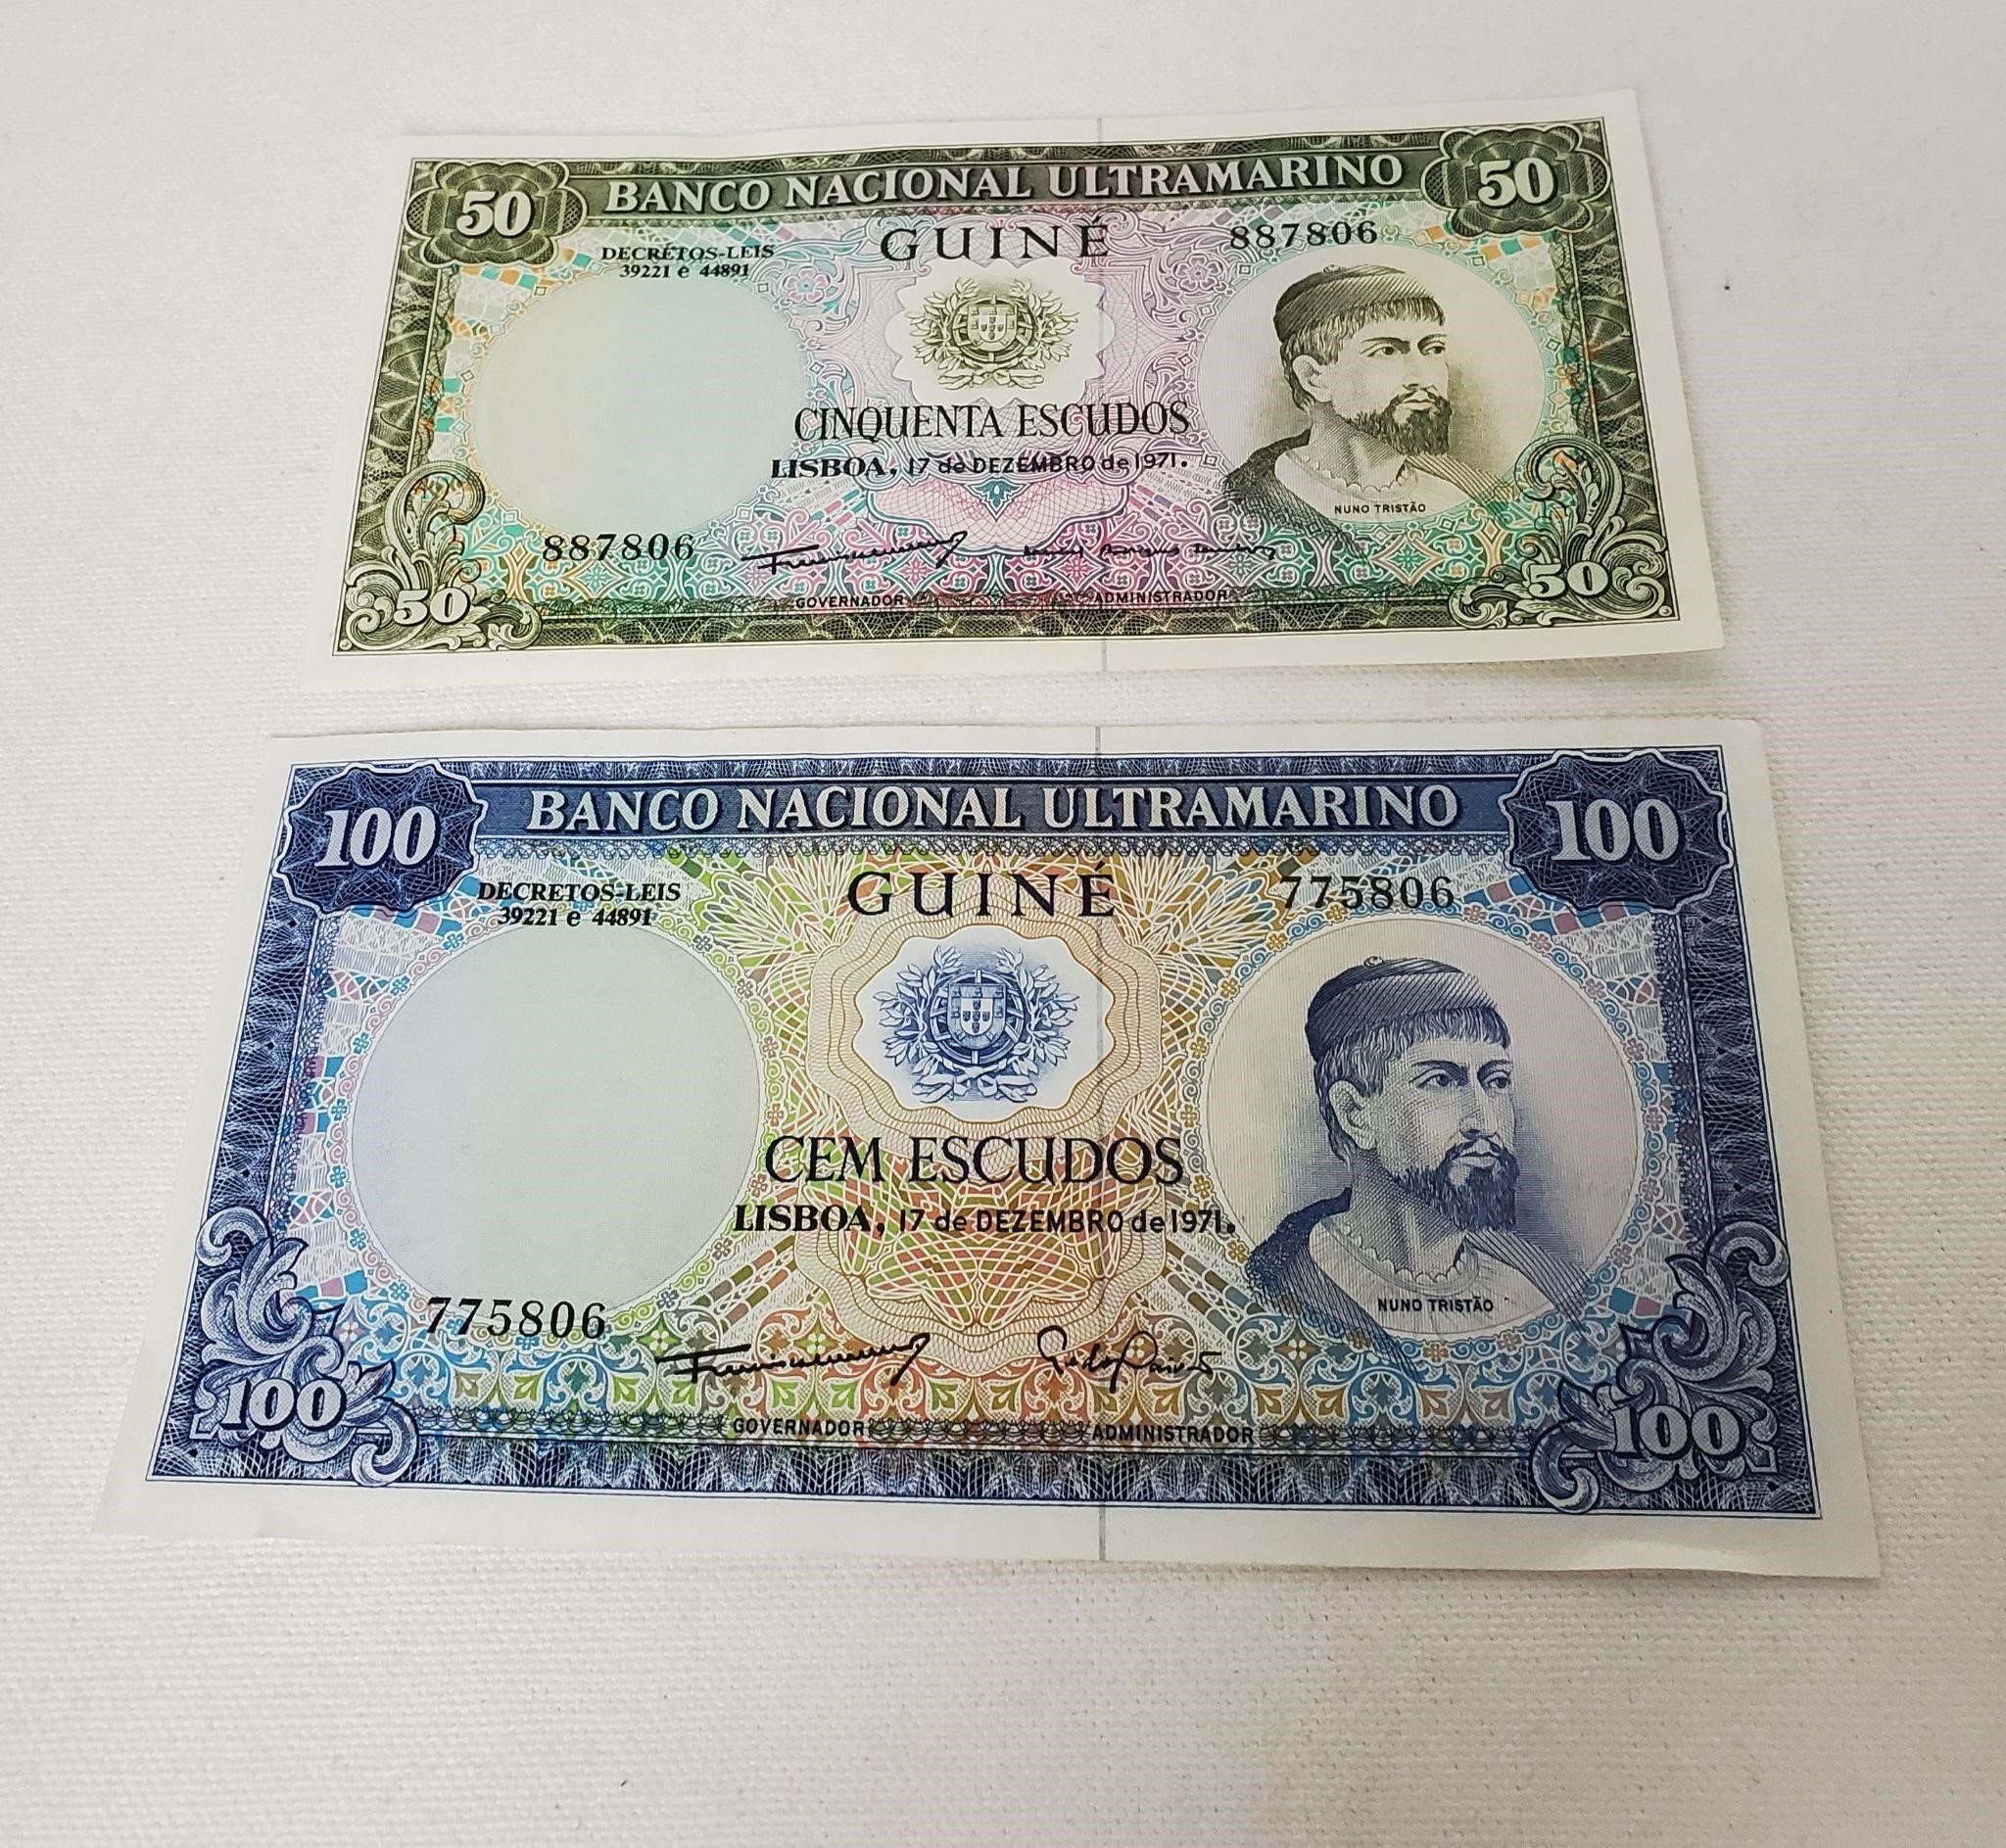 Ultra Marino Currency Notes